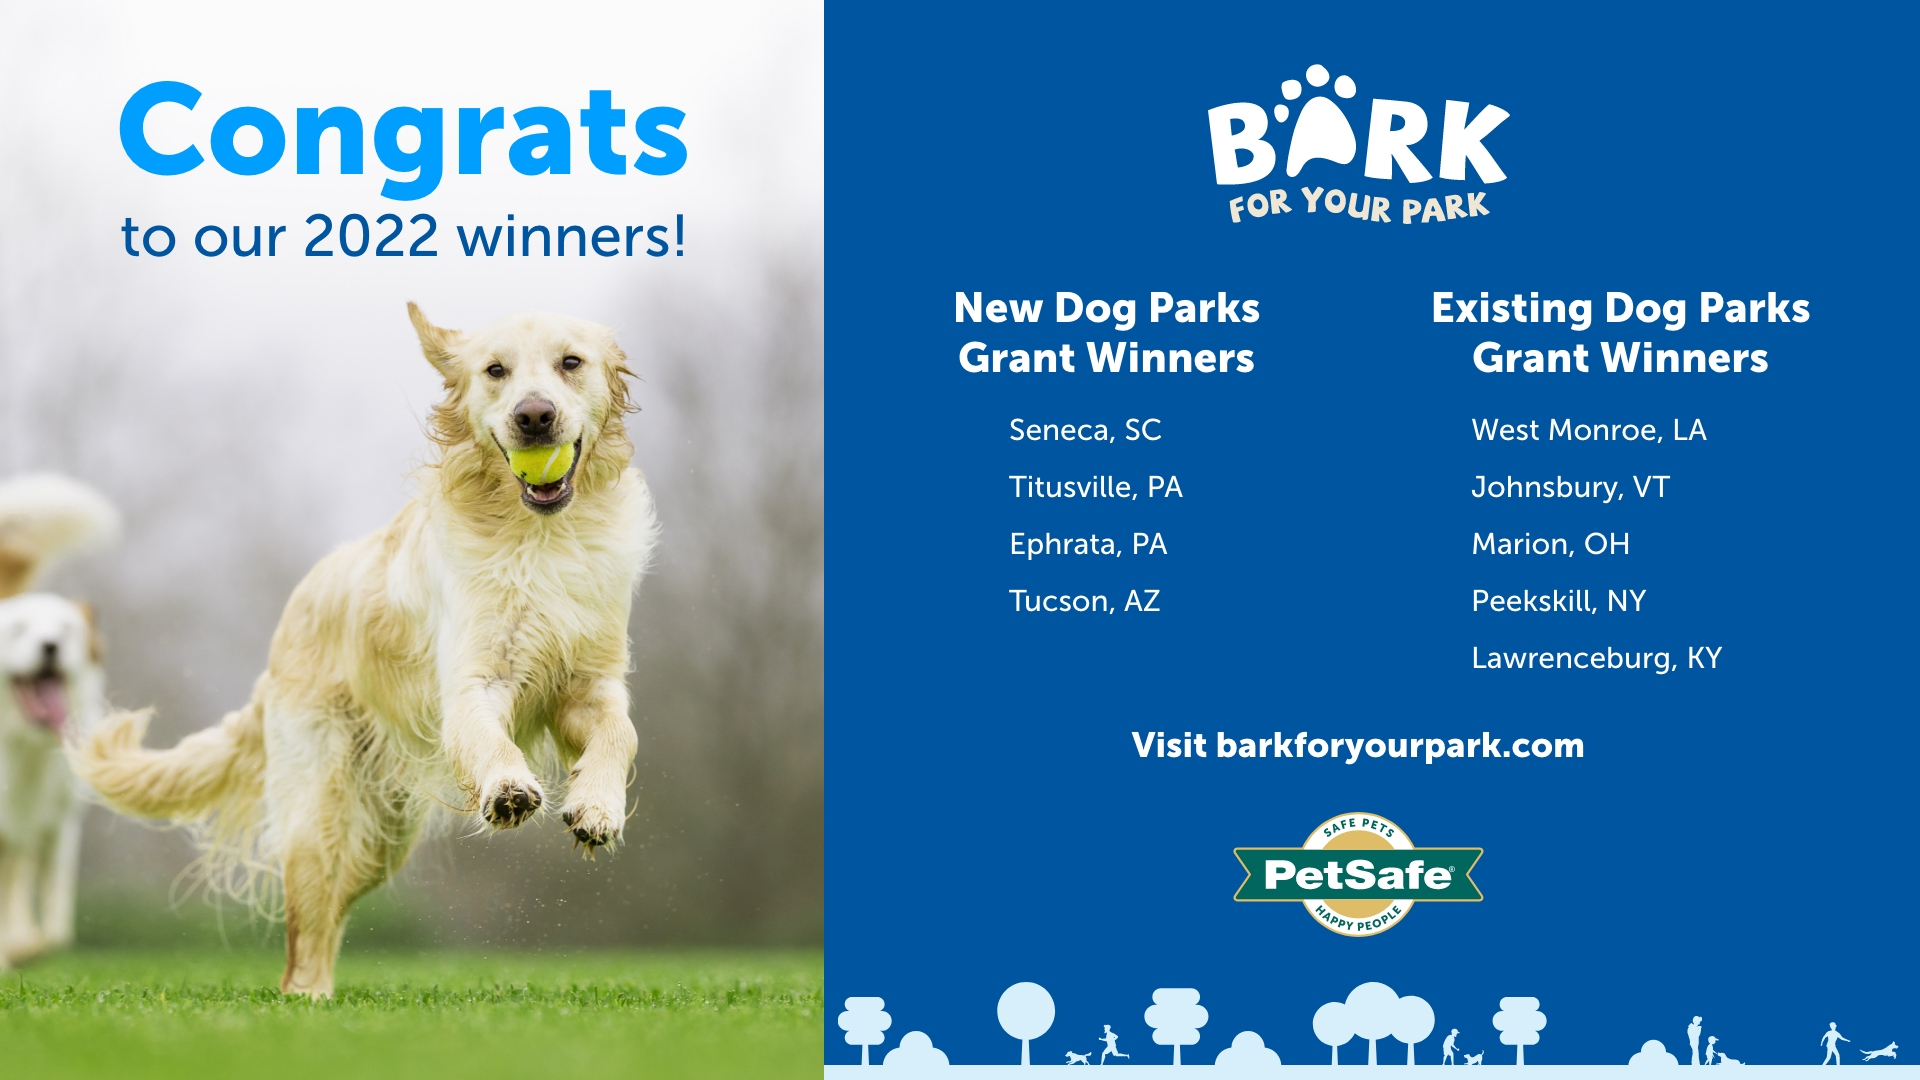 PetSafe® Announces Winning Communities for 2022 Bark for Your Park™ Grant  Contest, Awards $125,000 For Off-Leash Dog Parks | Business Wire